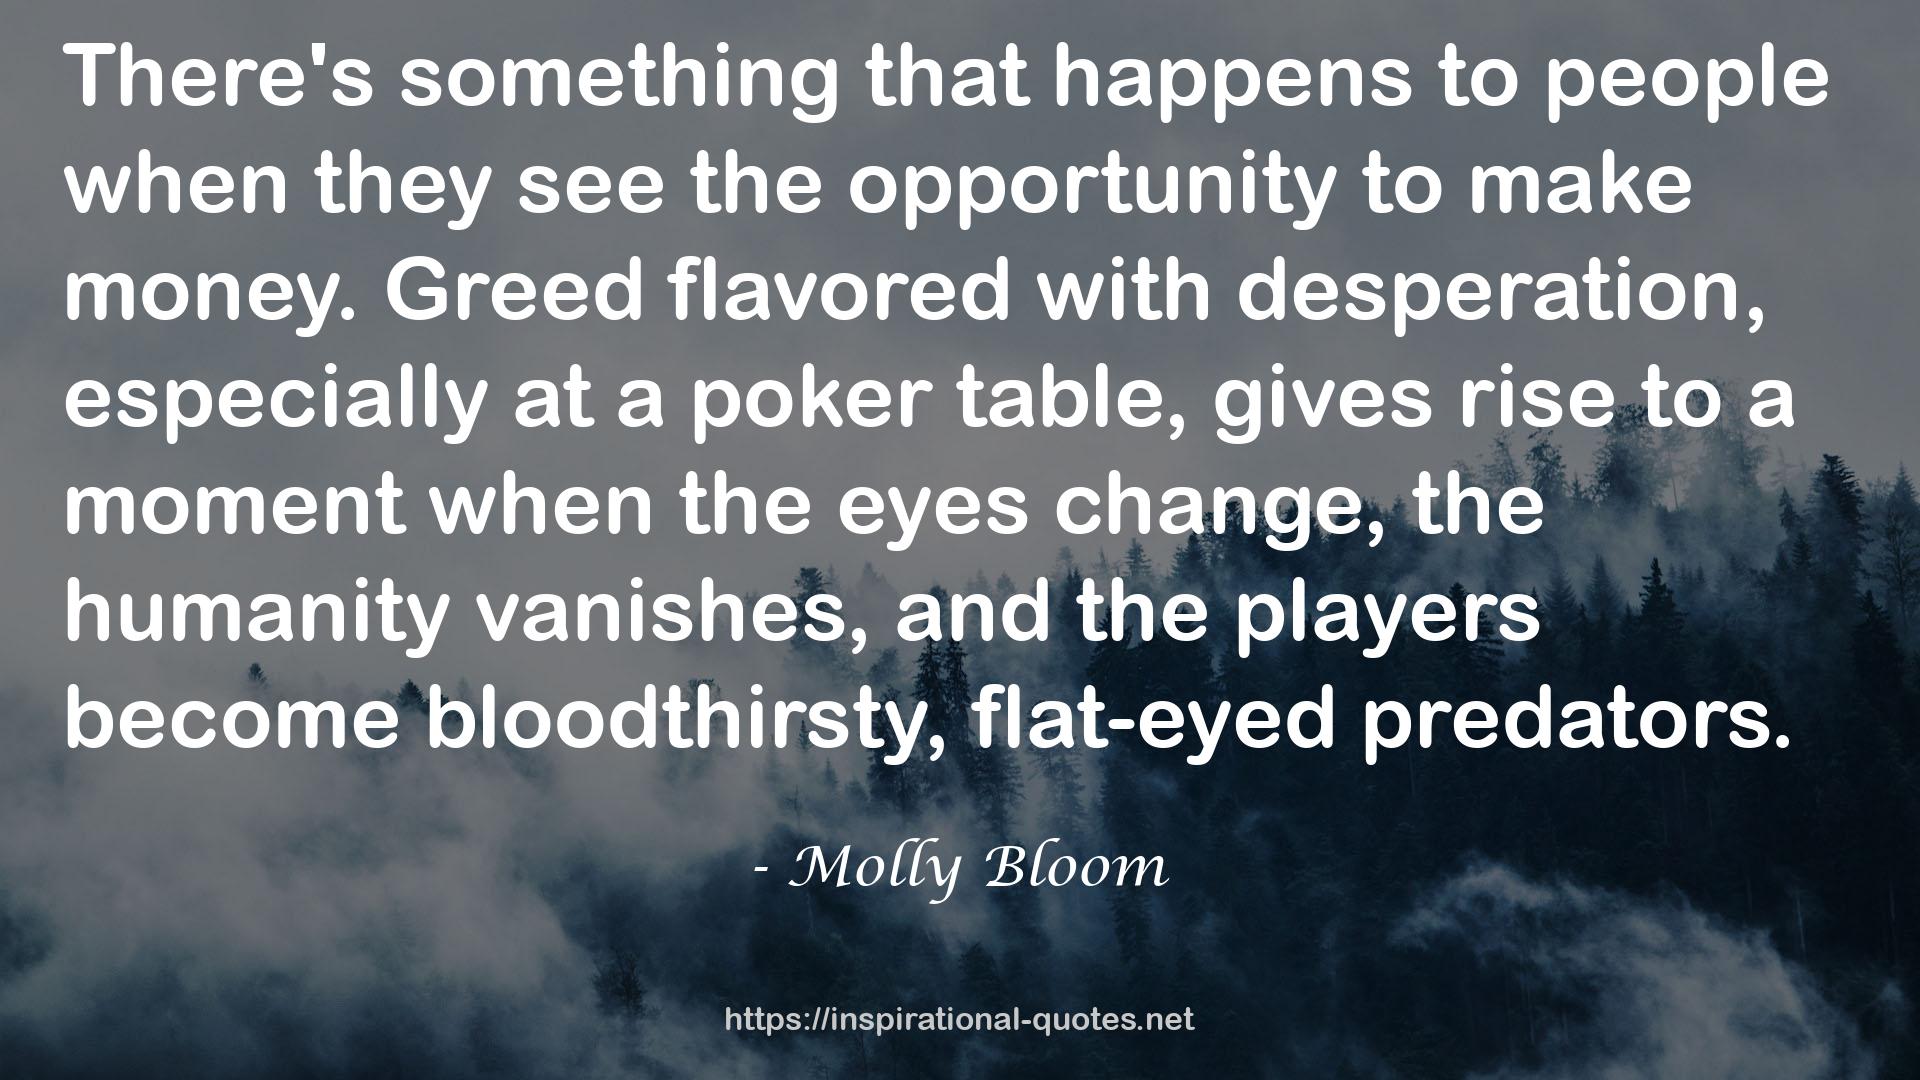 Molly Bloom QUOTES